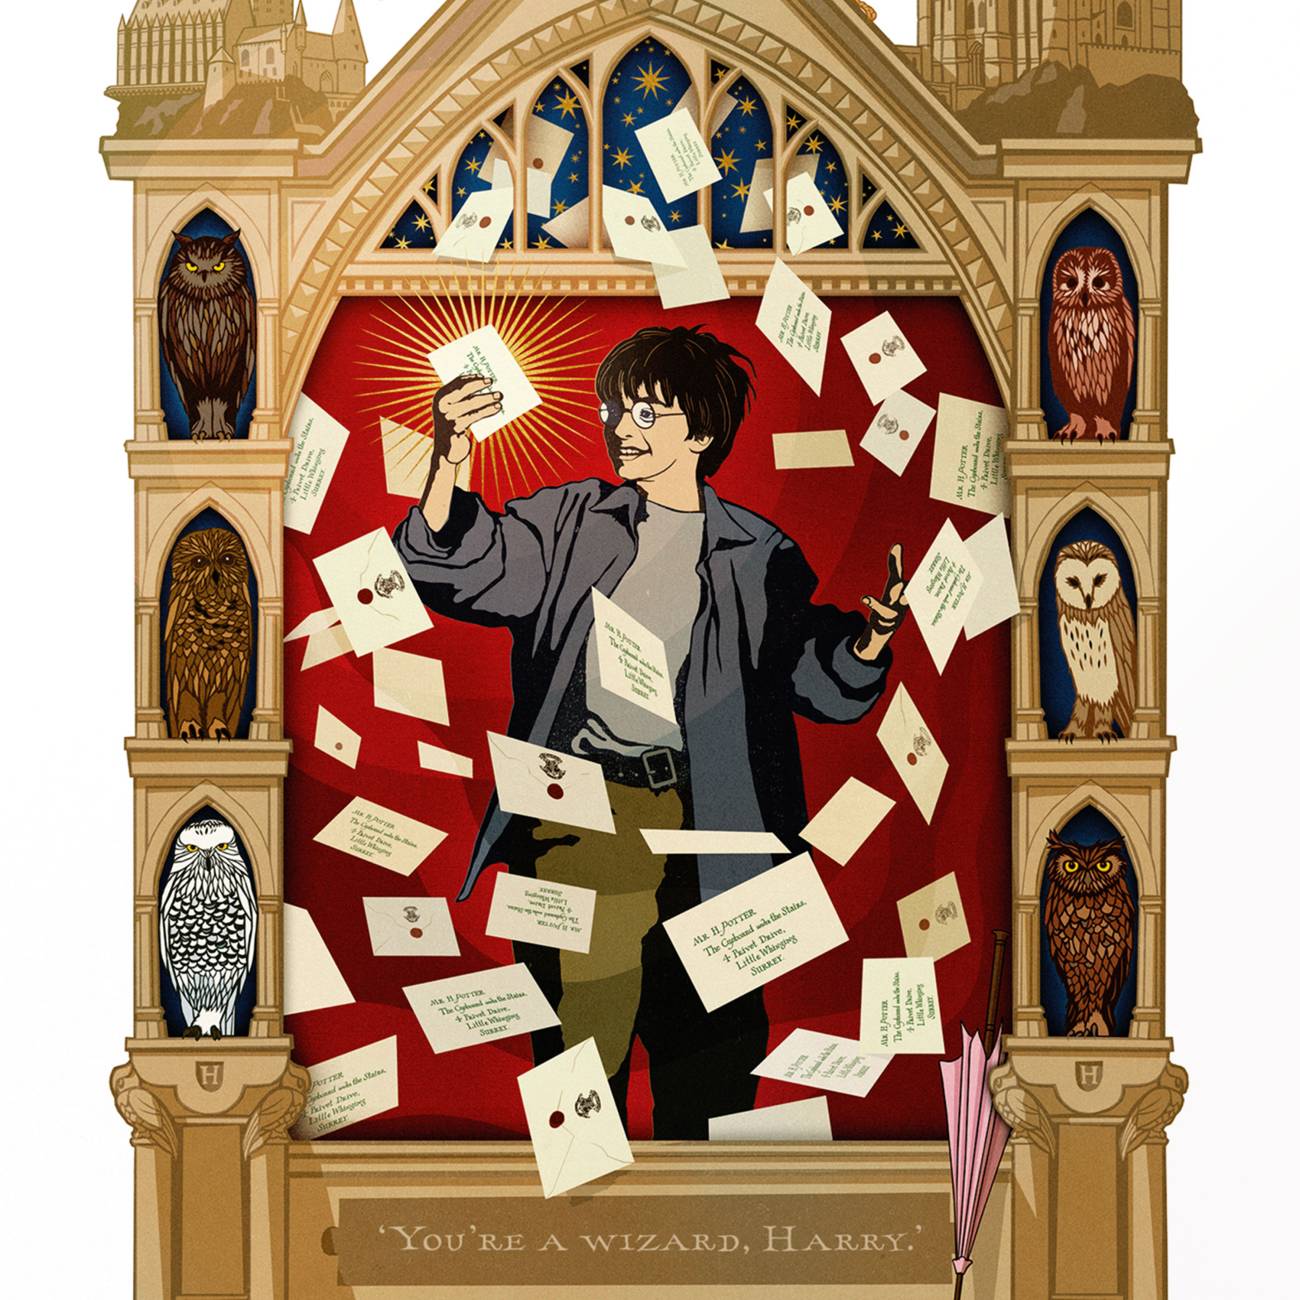 Harry Potter: a temporary MinaLima boutique opens in Paris, with